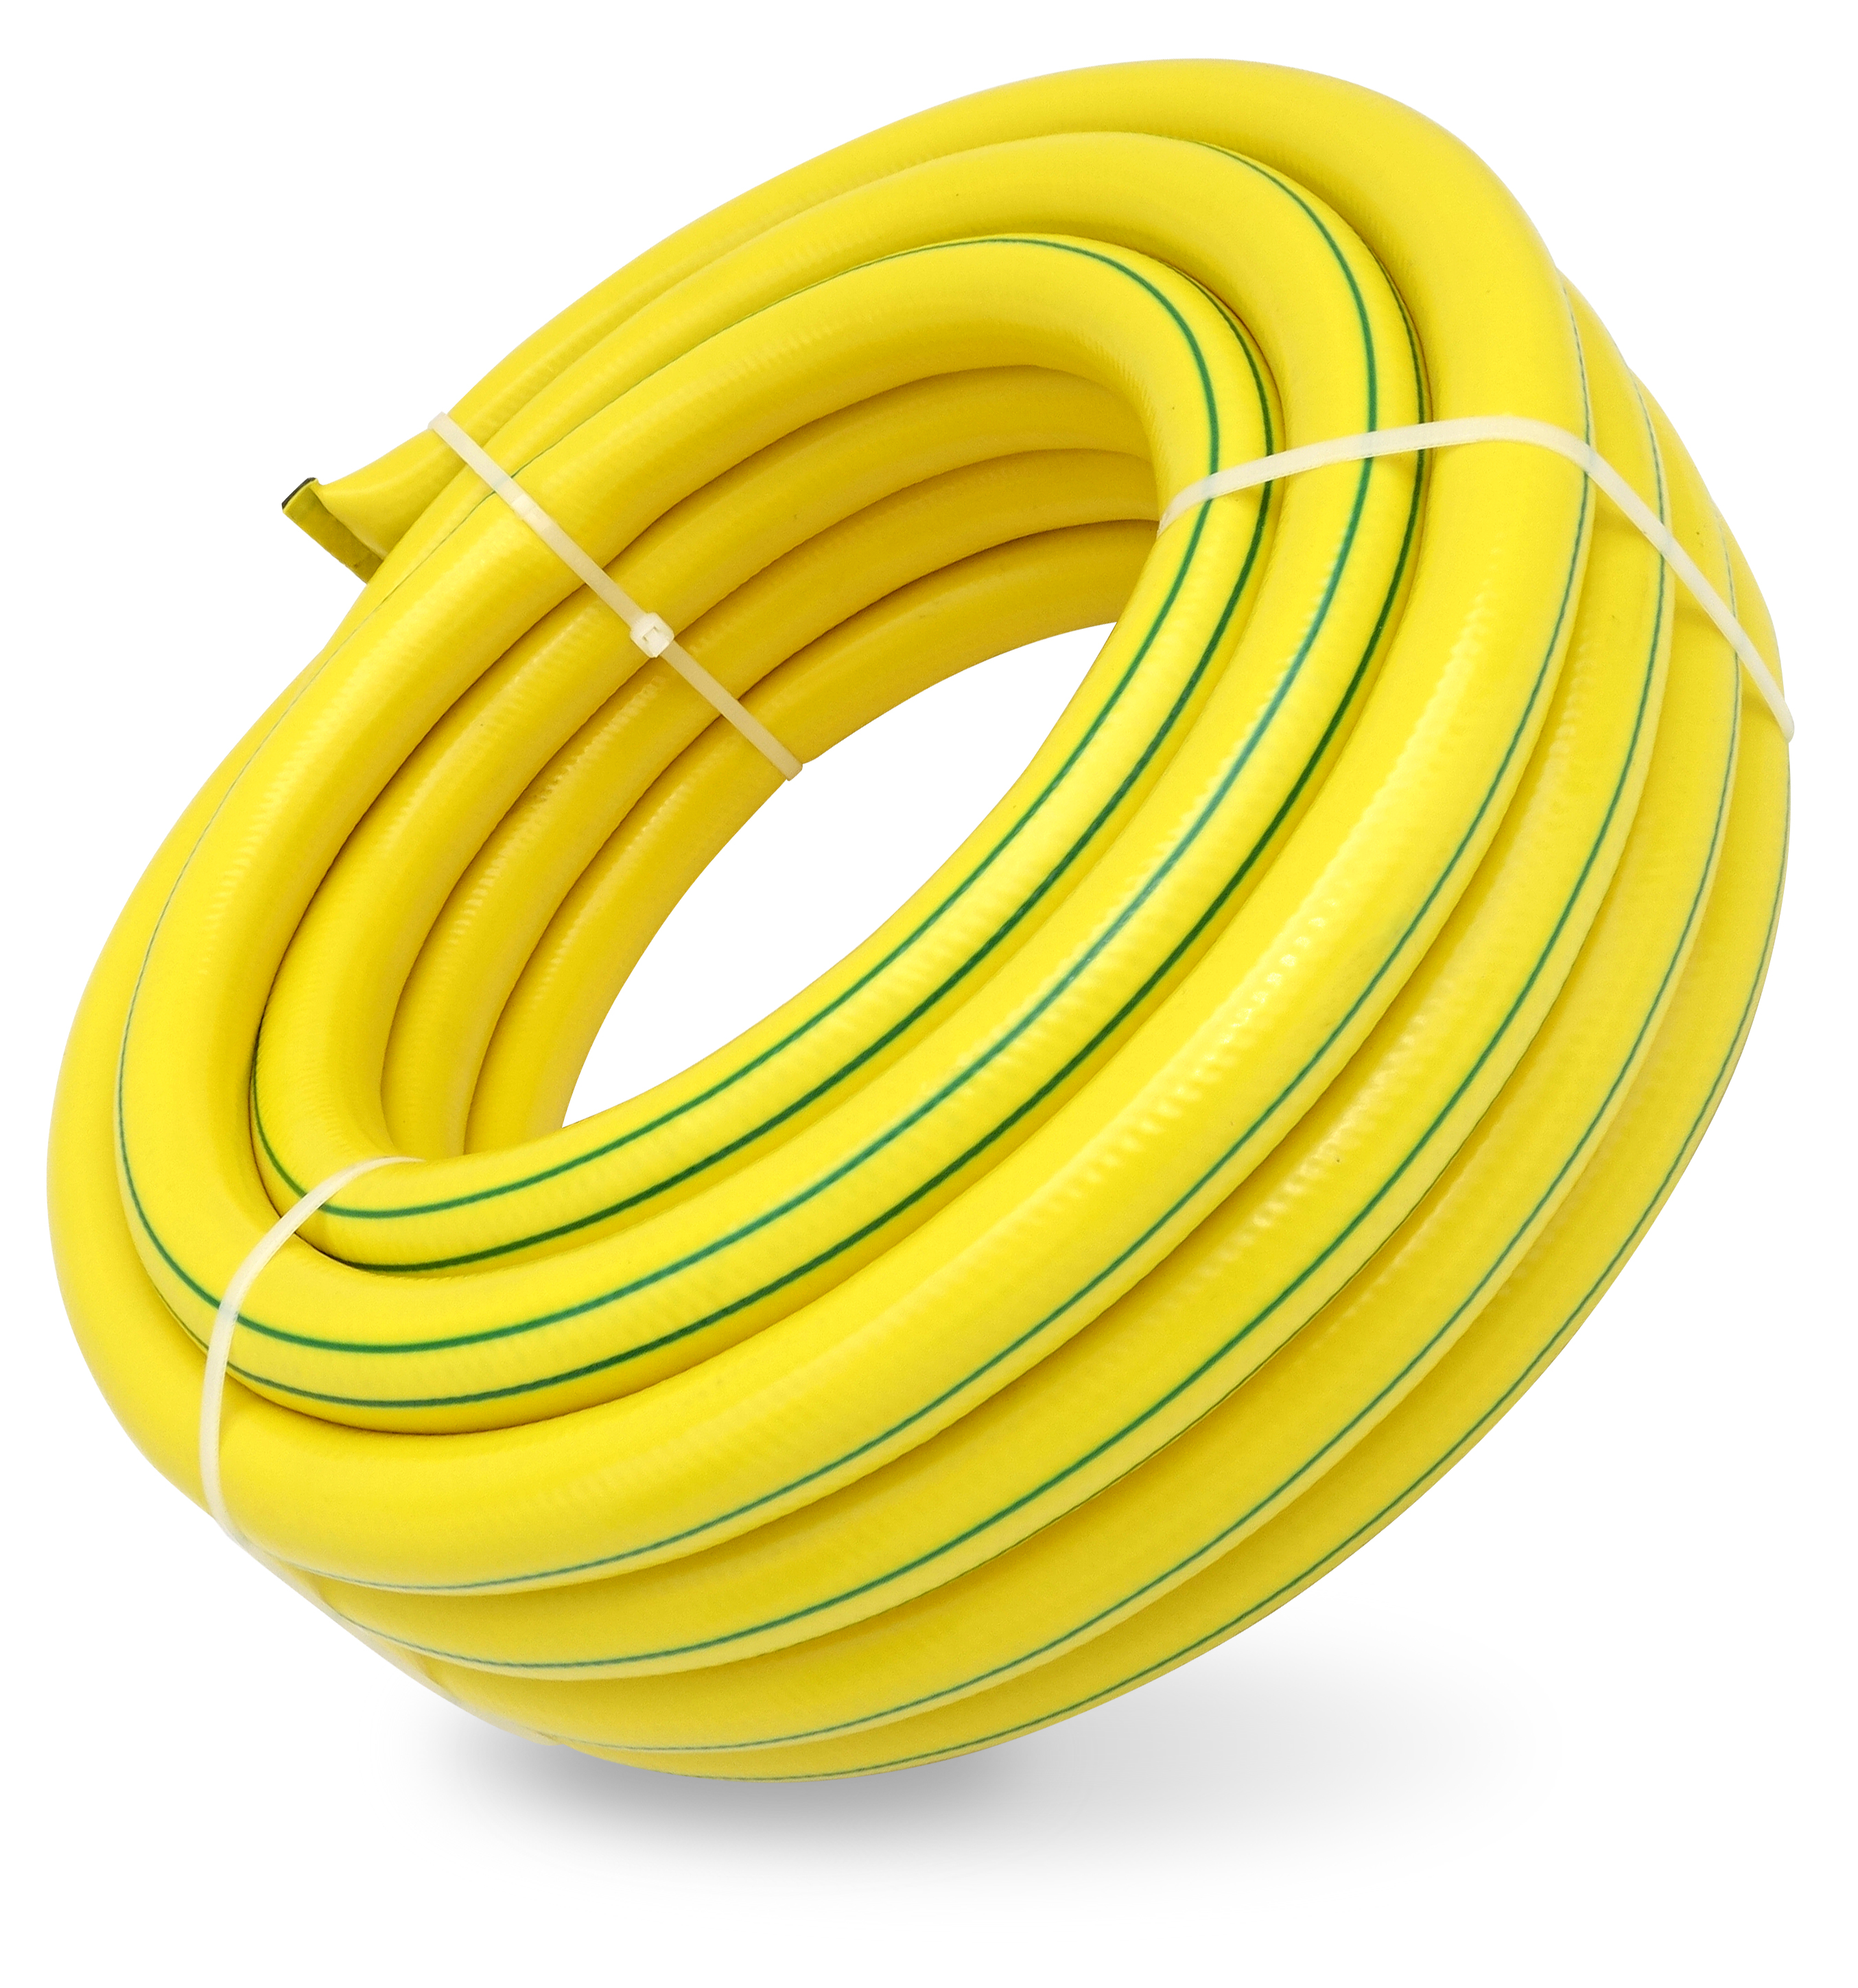 Why You Should Buy a PVC Garden Water Hose